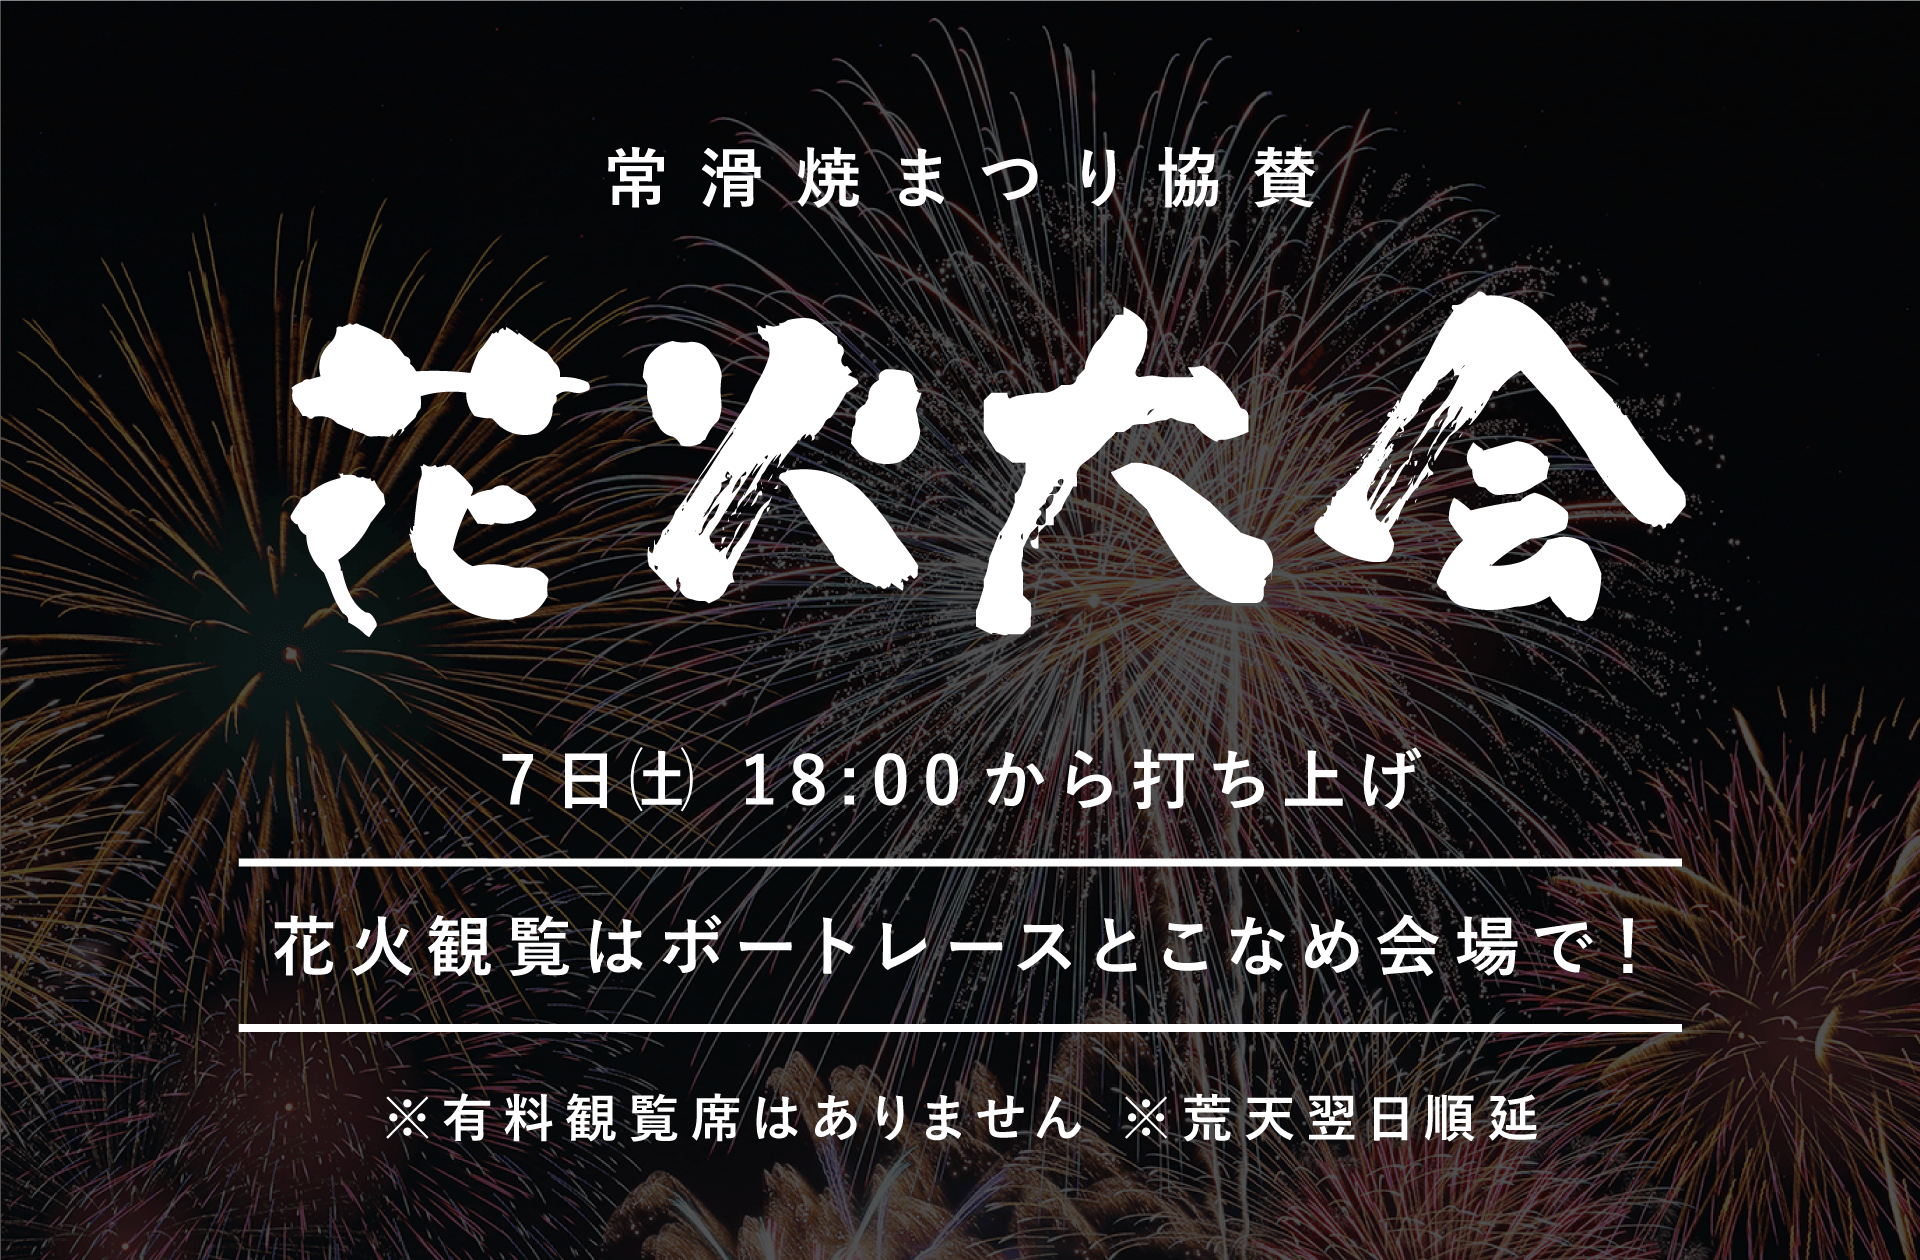 The fireworks display will be launched on October 7, 2023 at 6:00 pm.